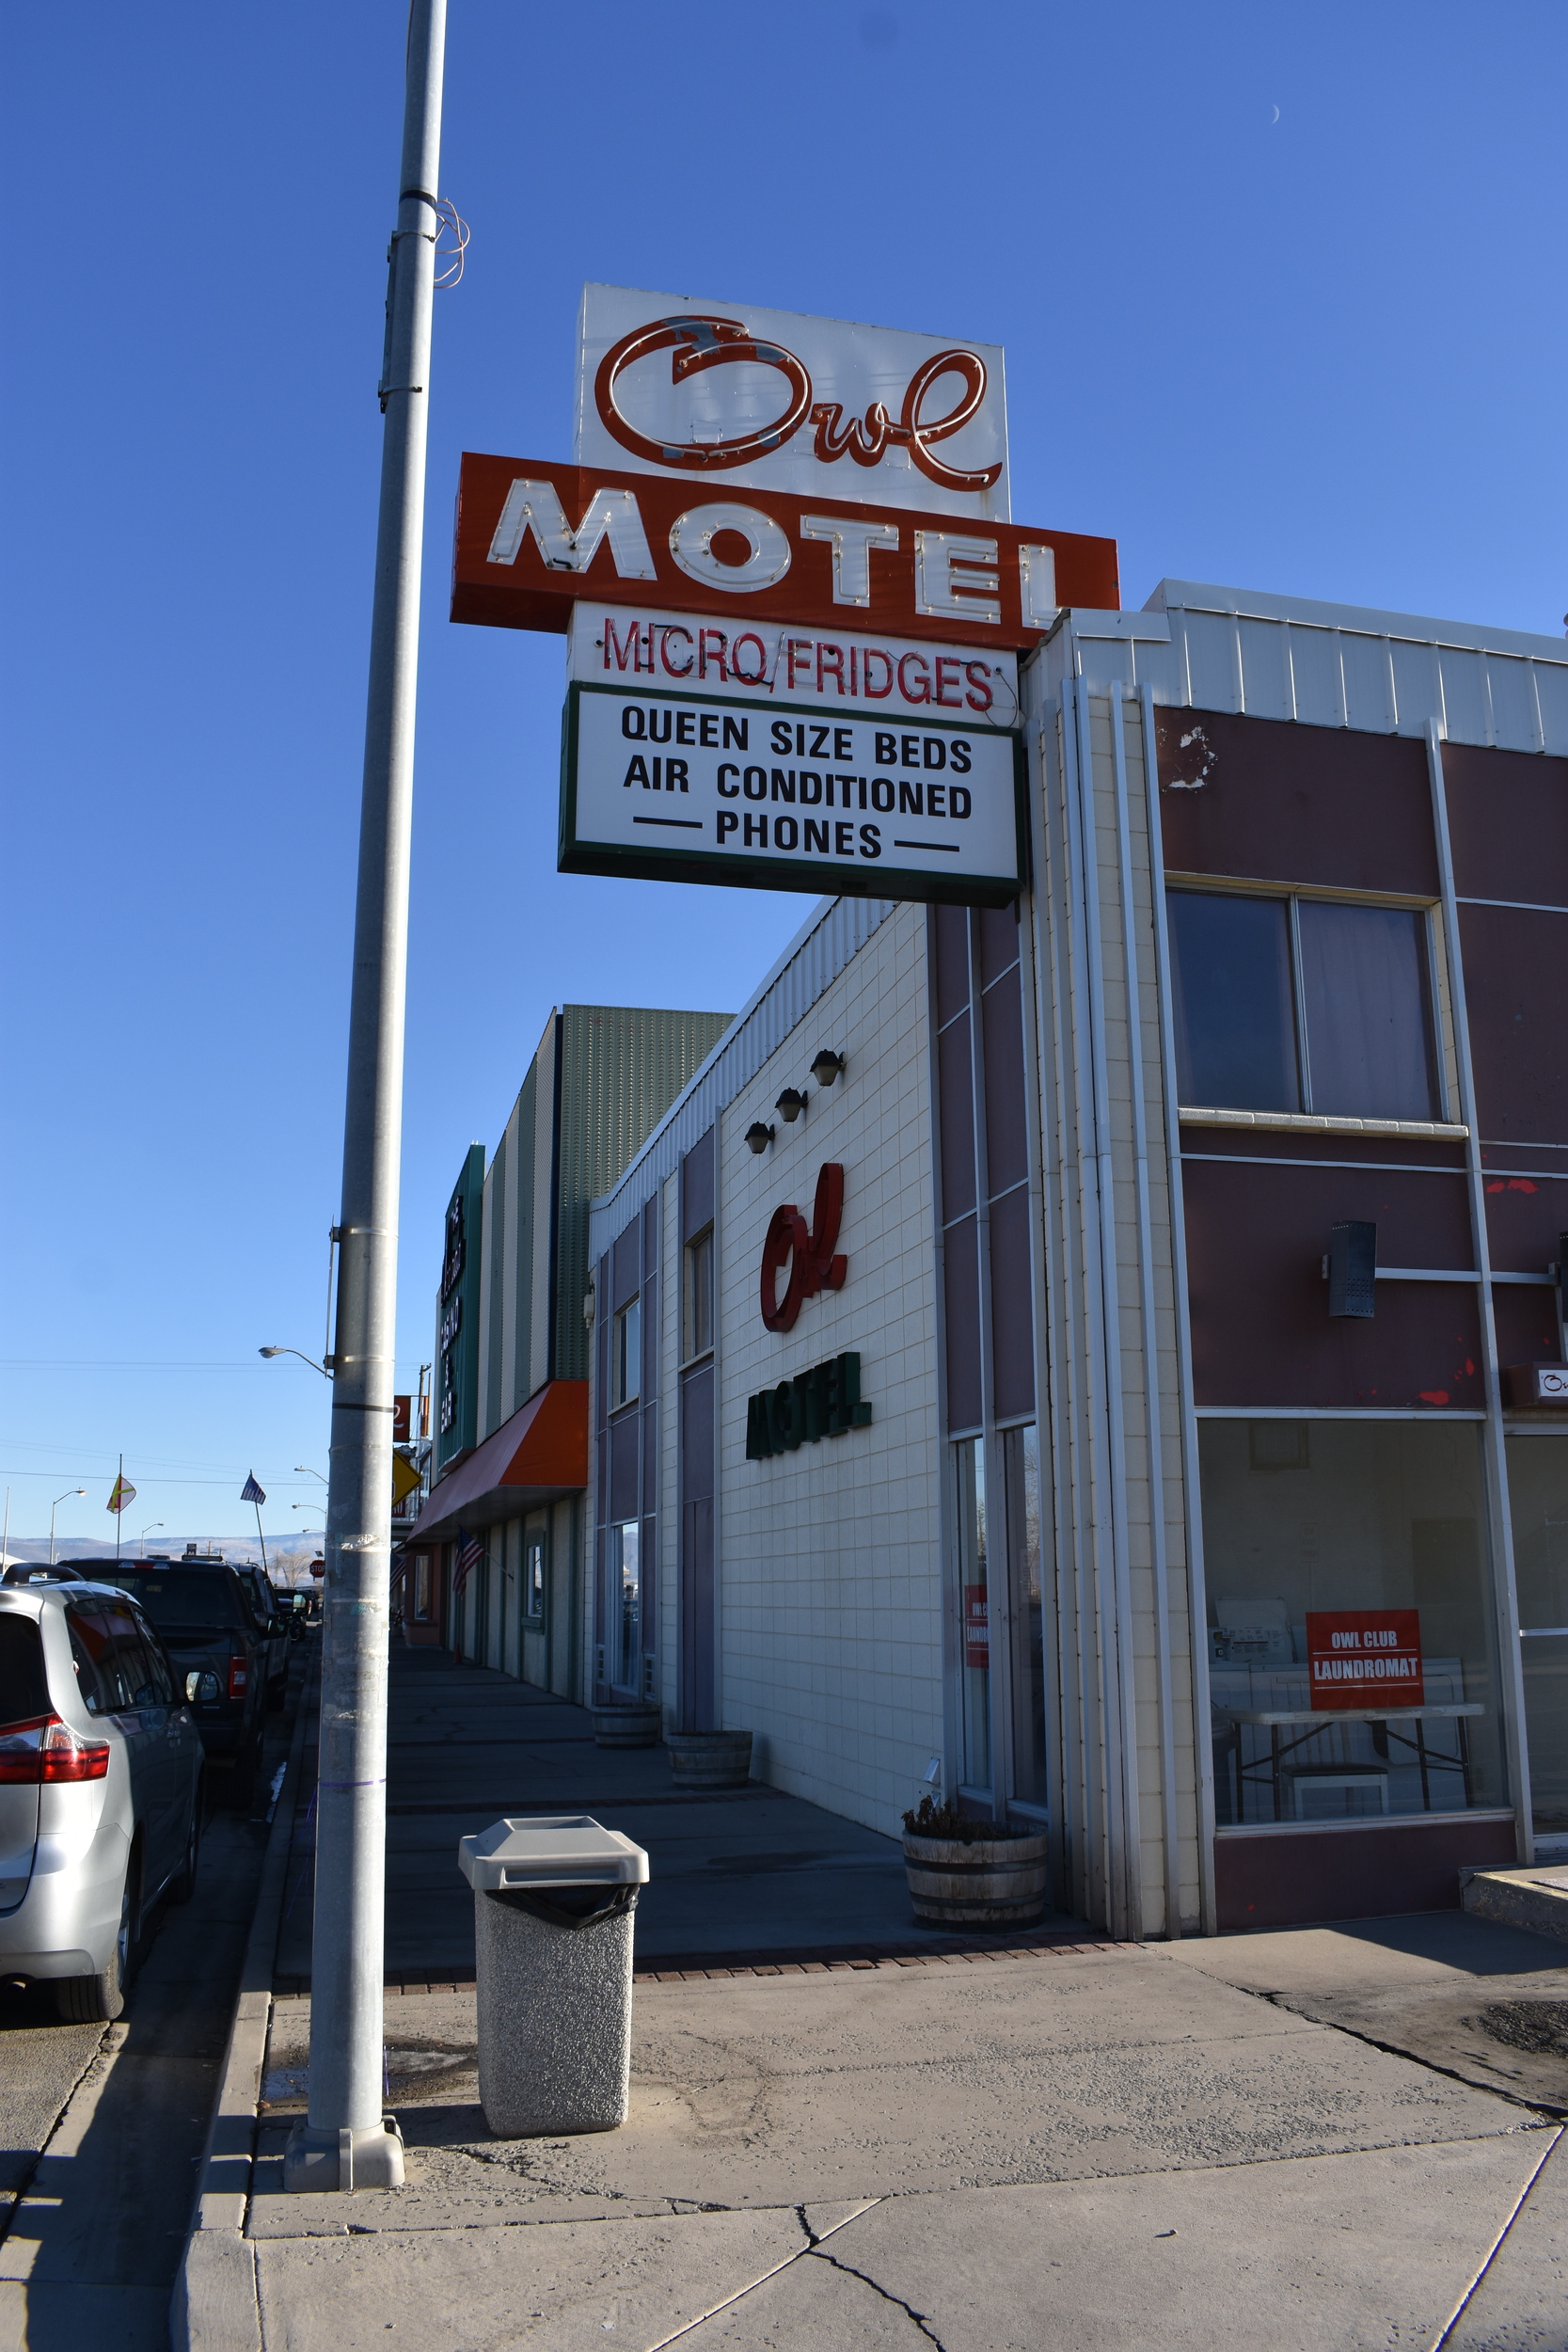 Owl Motel roof and wall mounted signs, Battle Mountain, Nevada